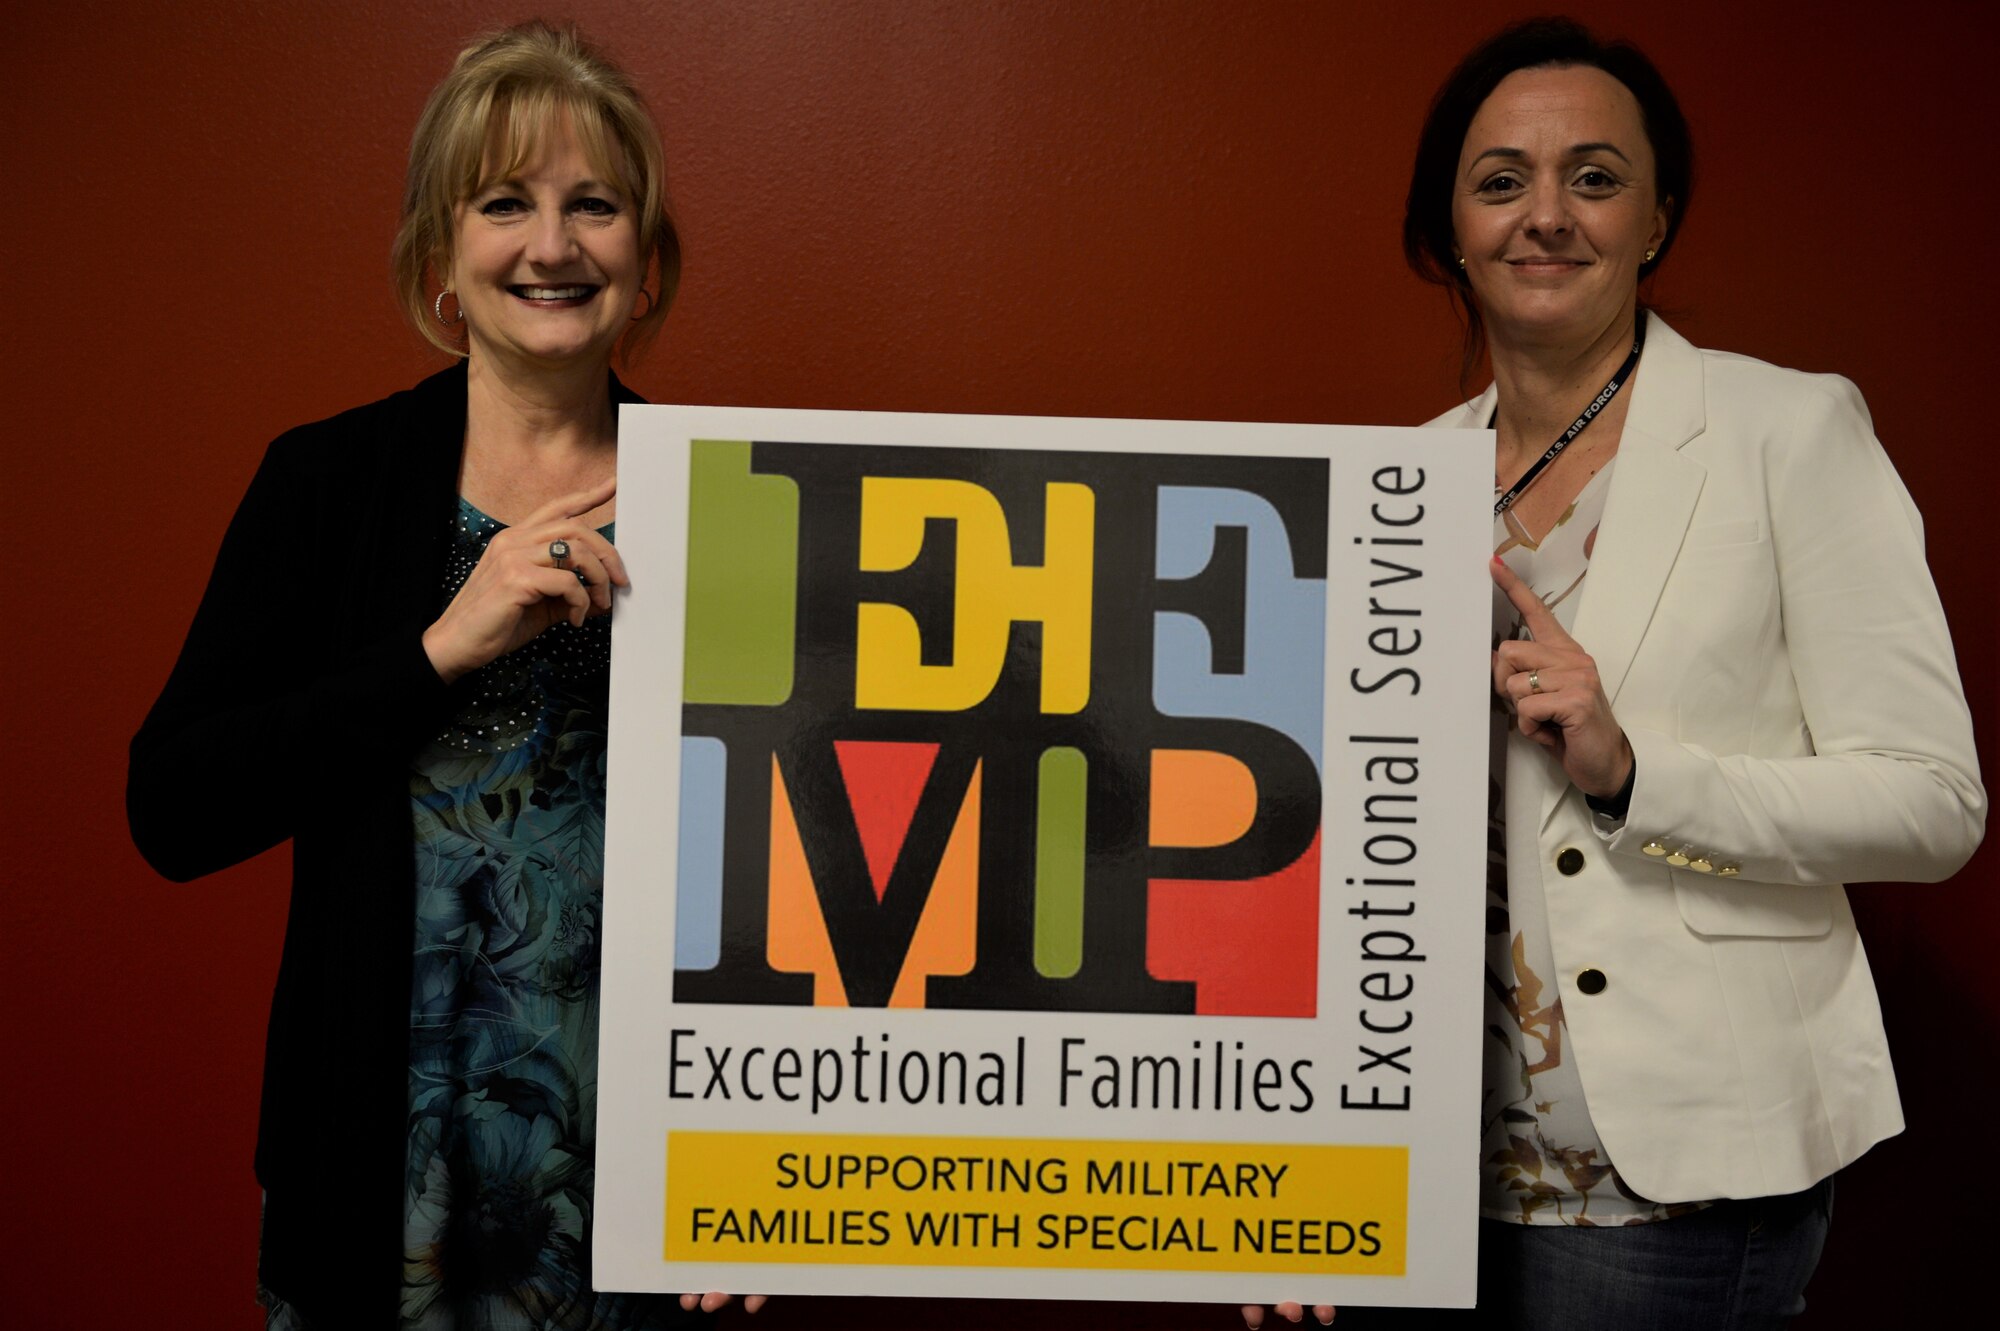 EFMP provides free care to military families